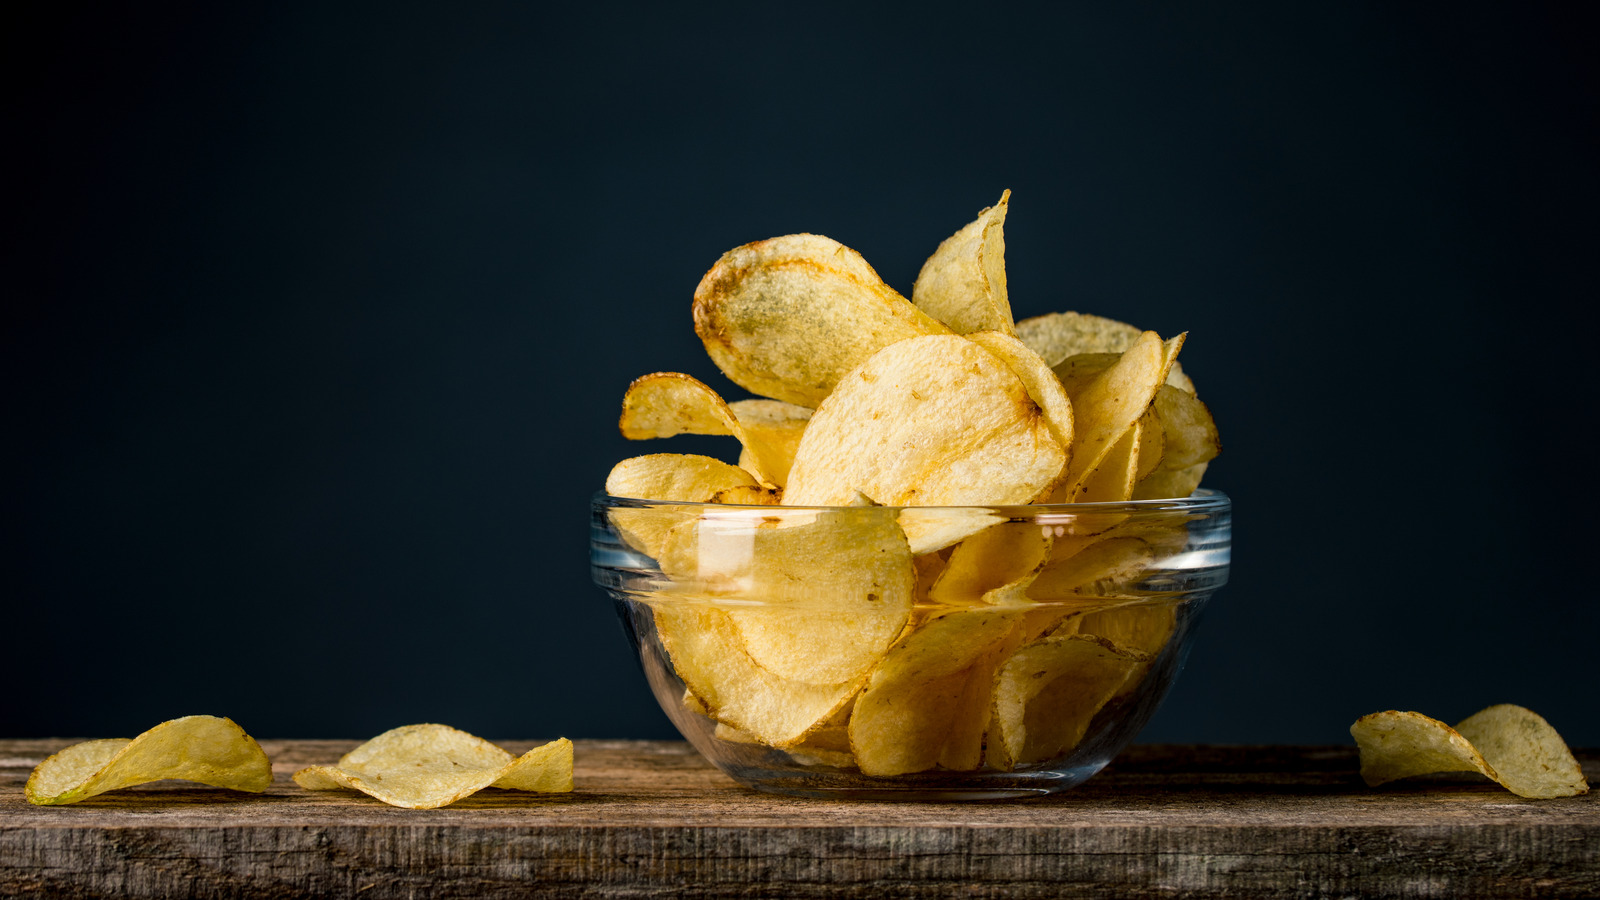 Are Baked Potato Chips Better for You Than Regular Chips